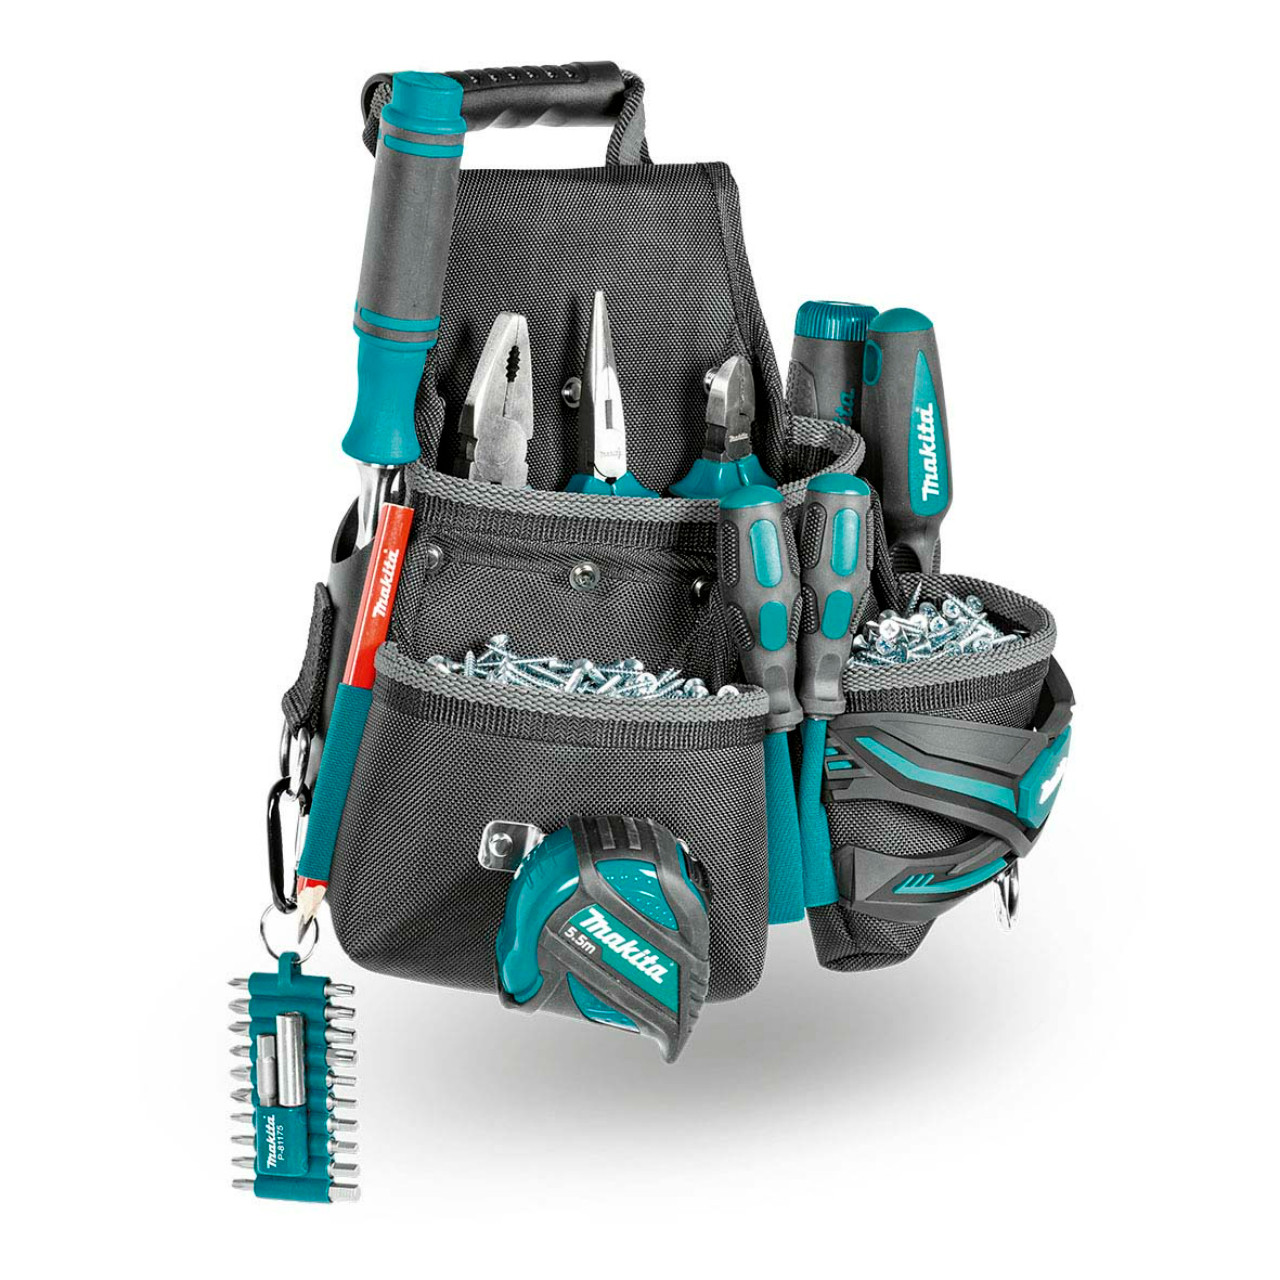 Makita Ultimate 3 Pocket Fixing Pouch